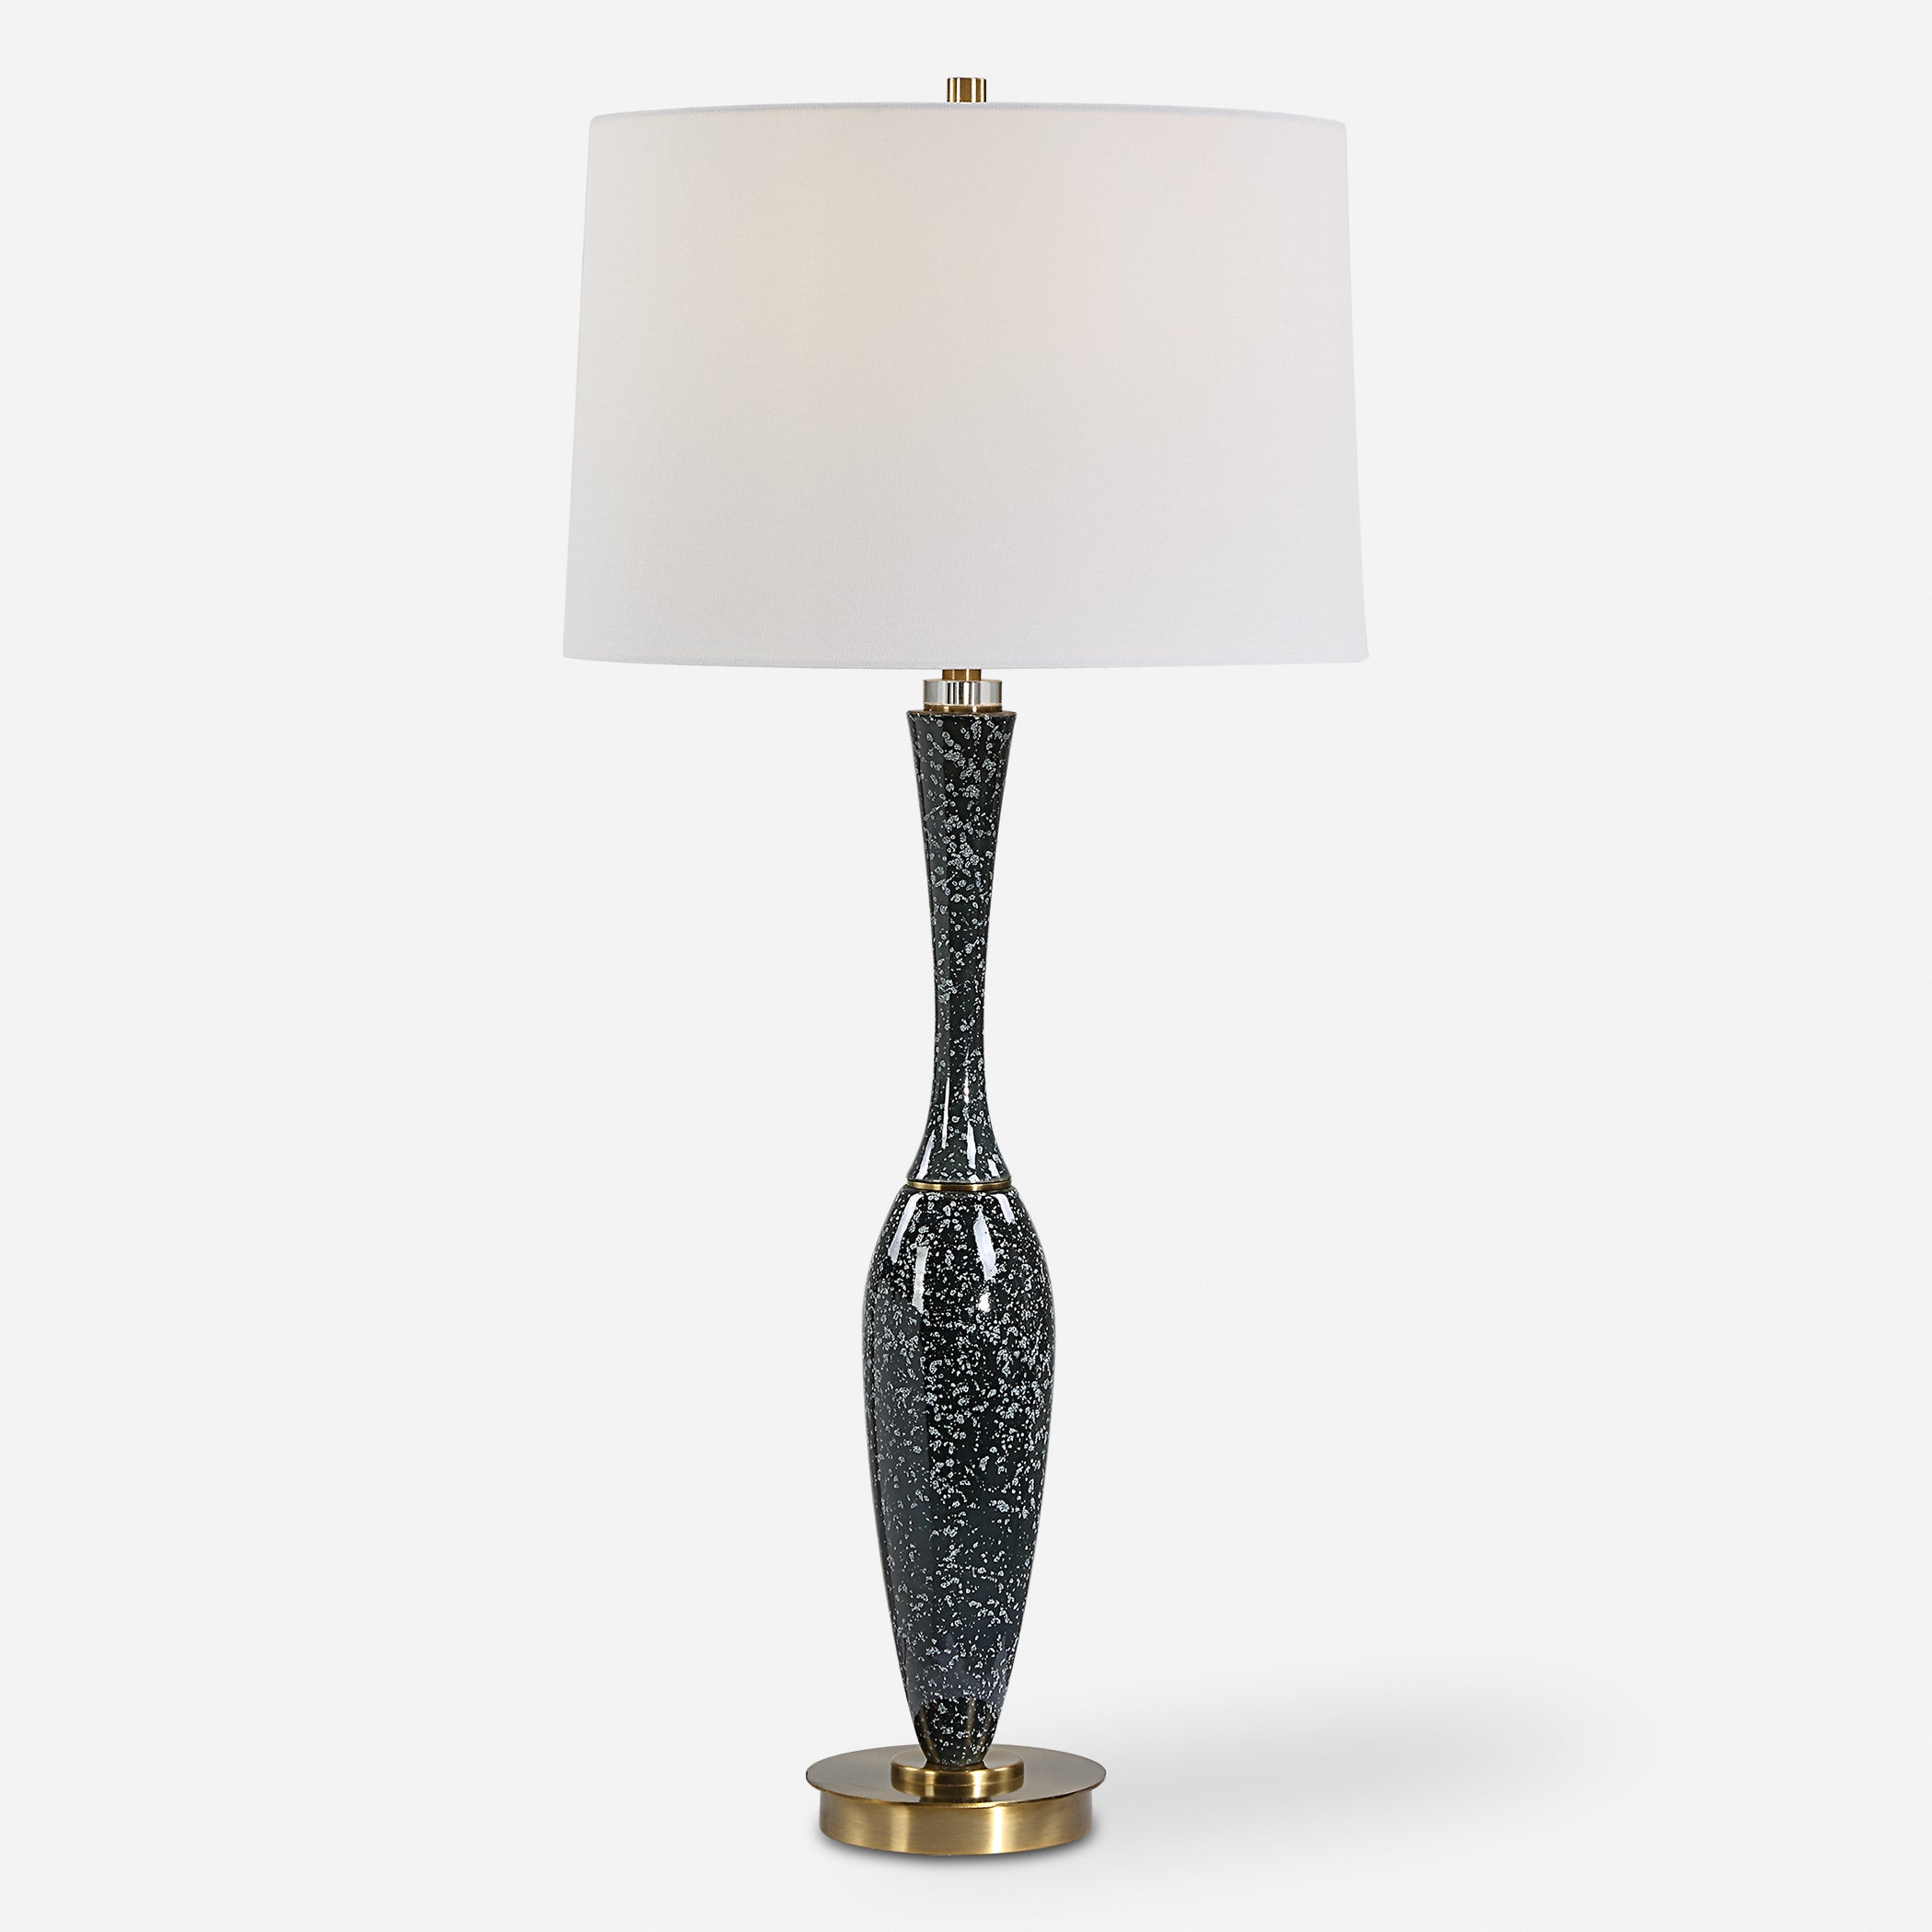 Uttermost Remy Polished Table Lamp Polished Table Lamp Uttermost   